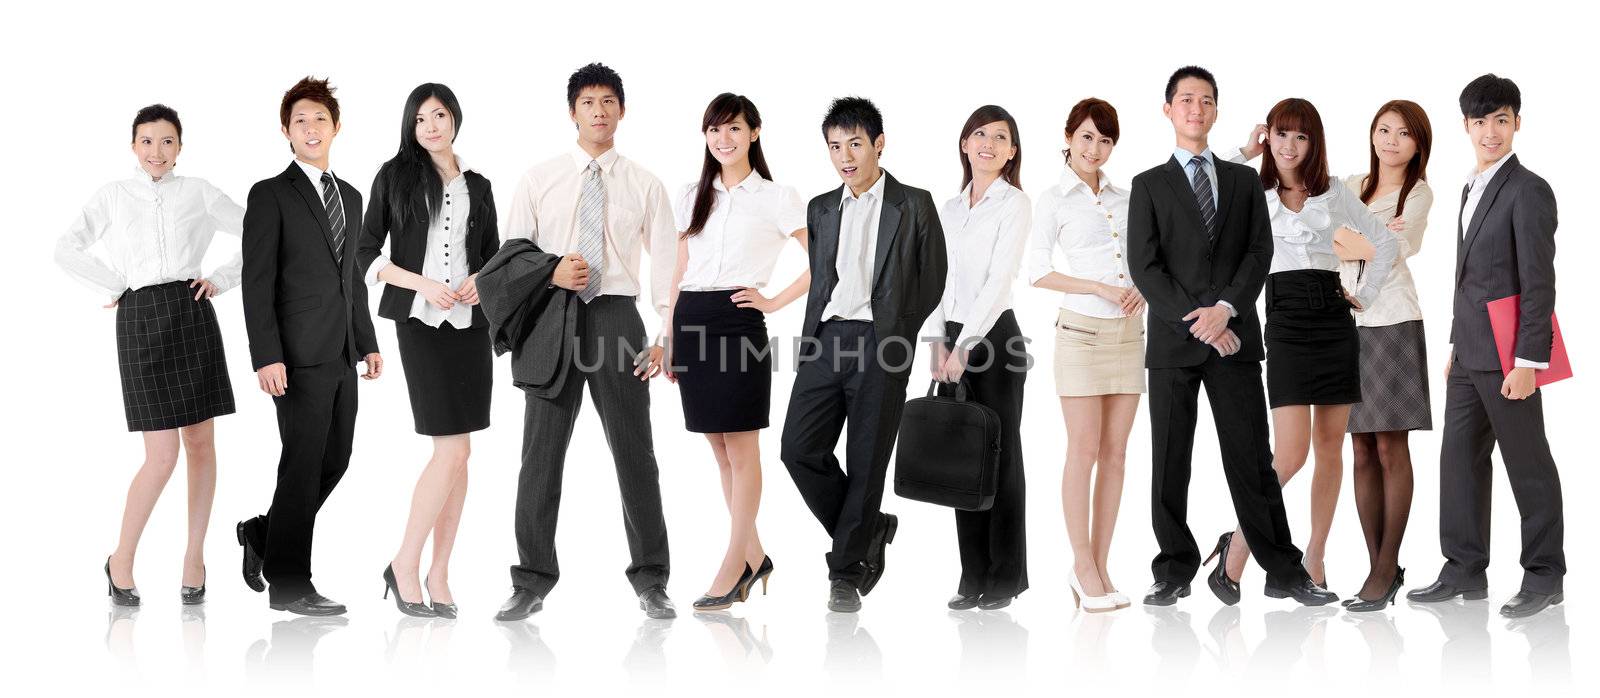 Asian business team, businesswoman and businessman in group standing and looking at you, isolated on white background.